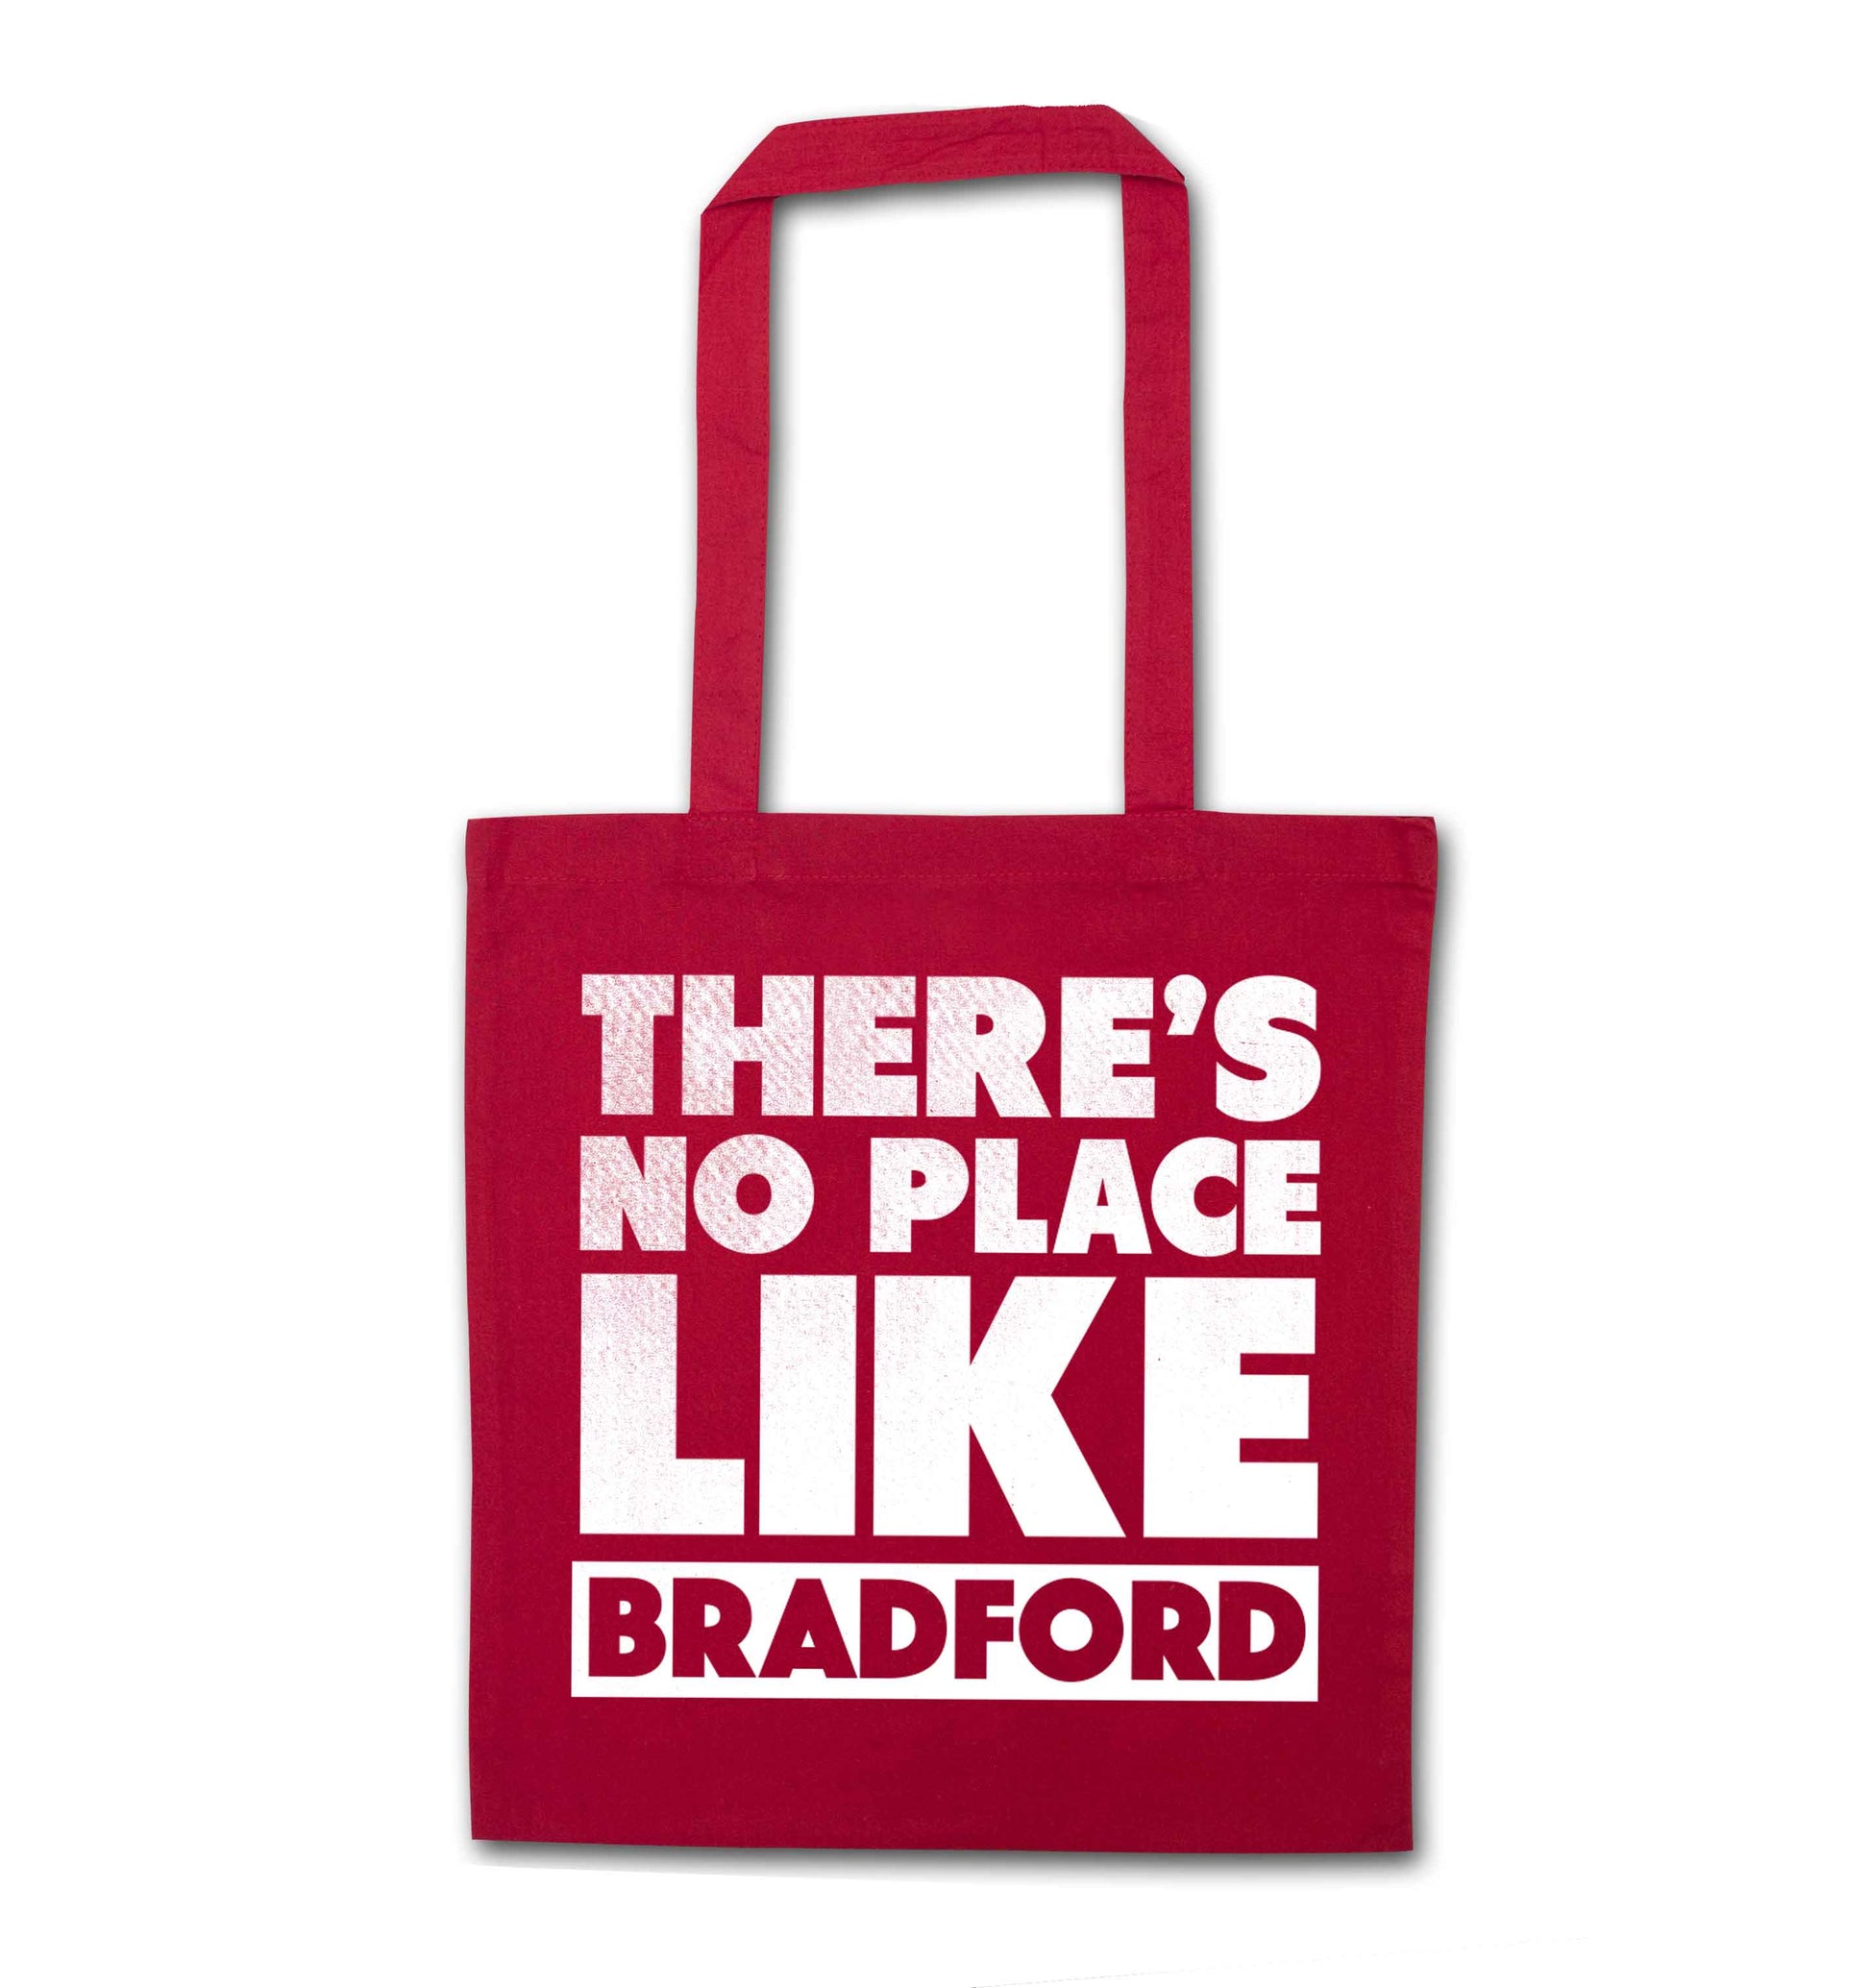 There's no place like Bradford red tote bag